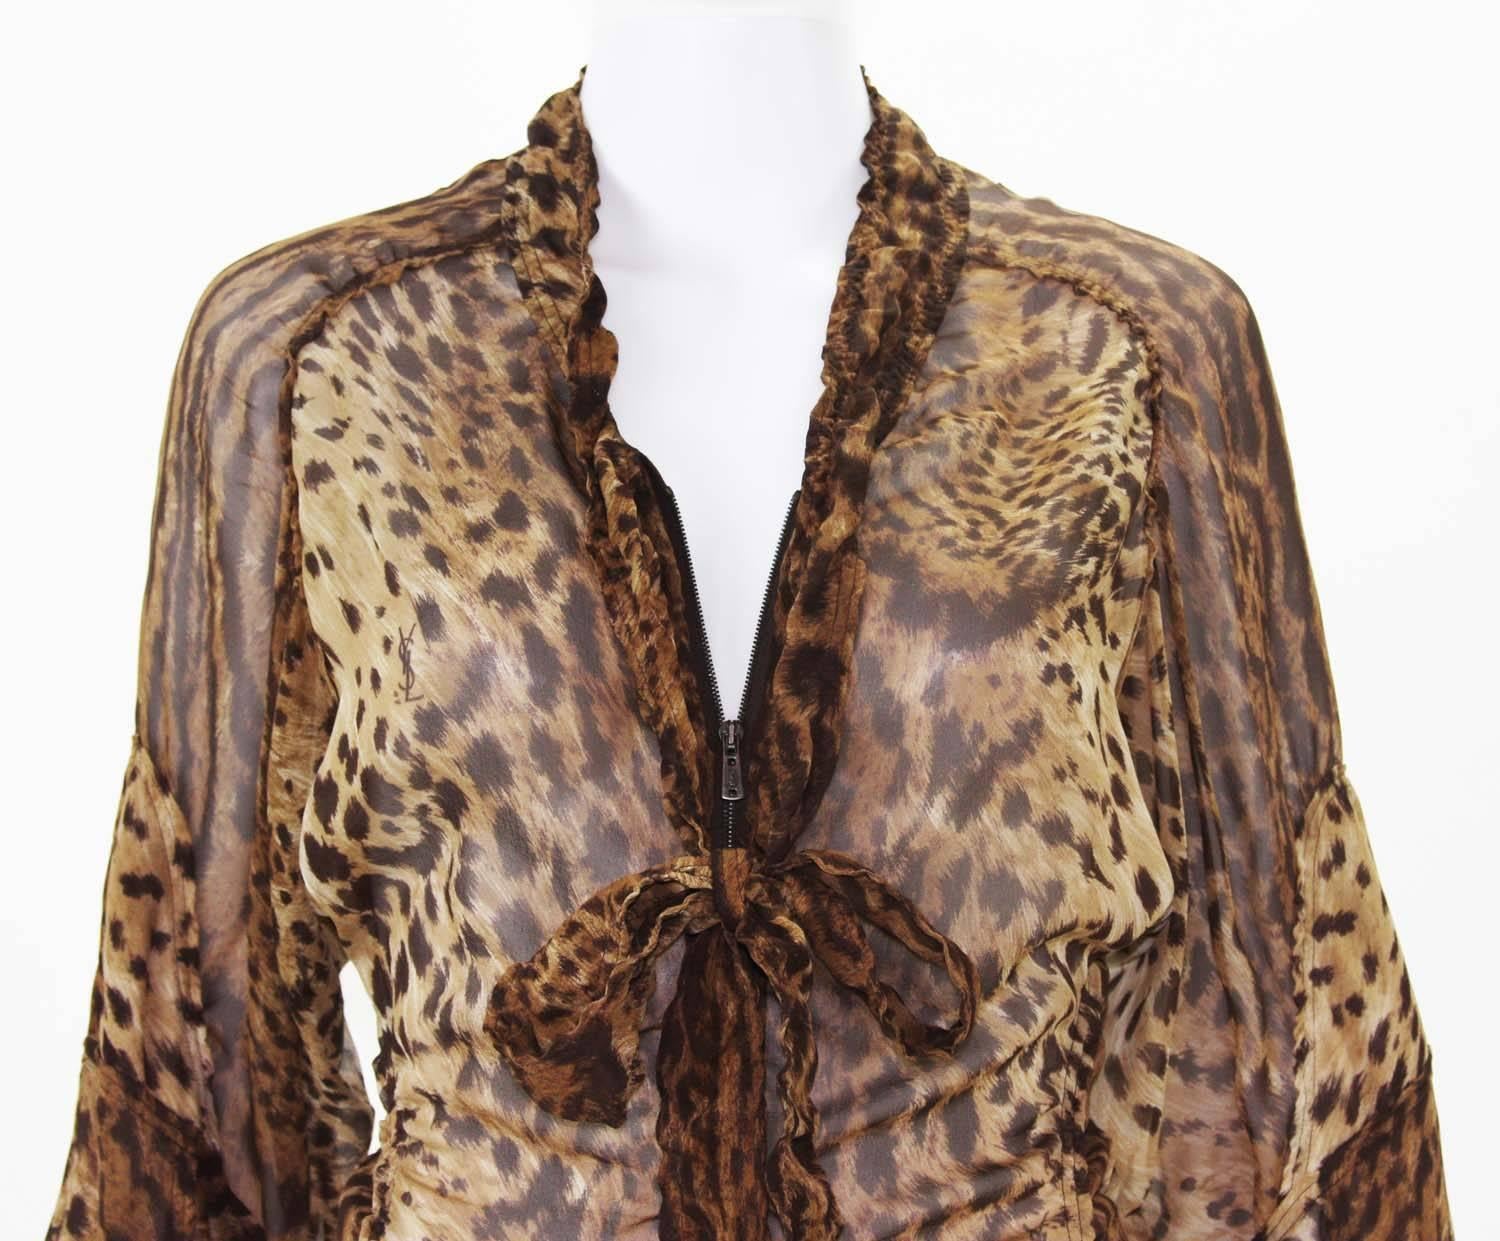 Tom Ford for Yves Saint Laurent S/S 2002 Safari Collection Leopard Silk Top F 38 For Sale 2